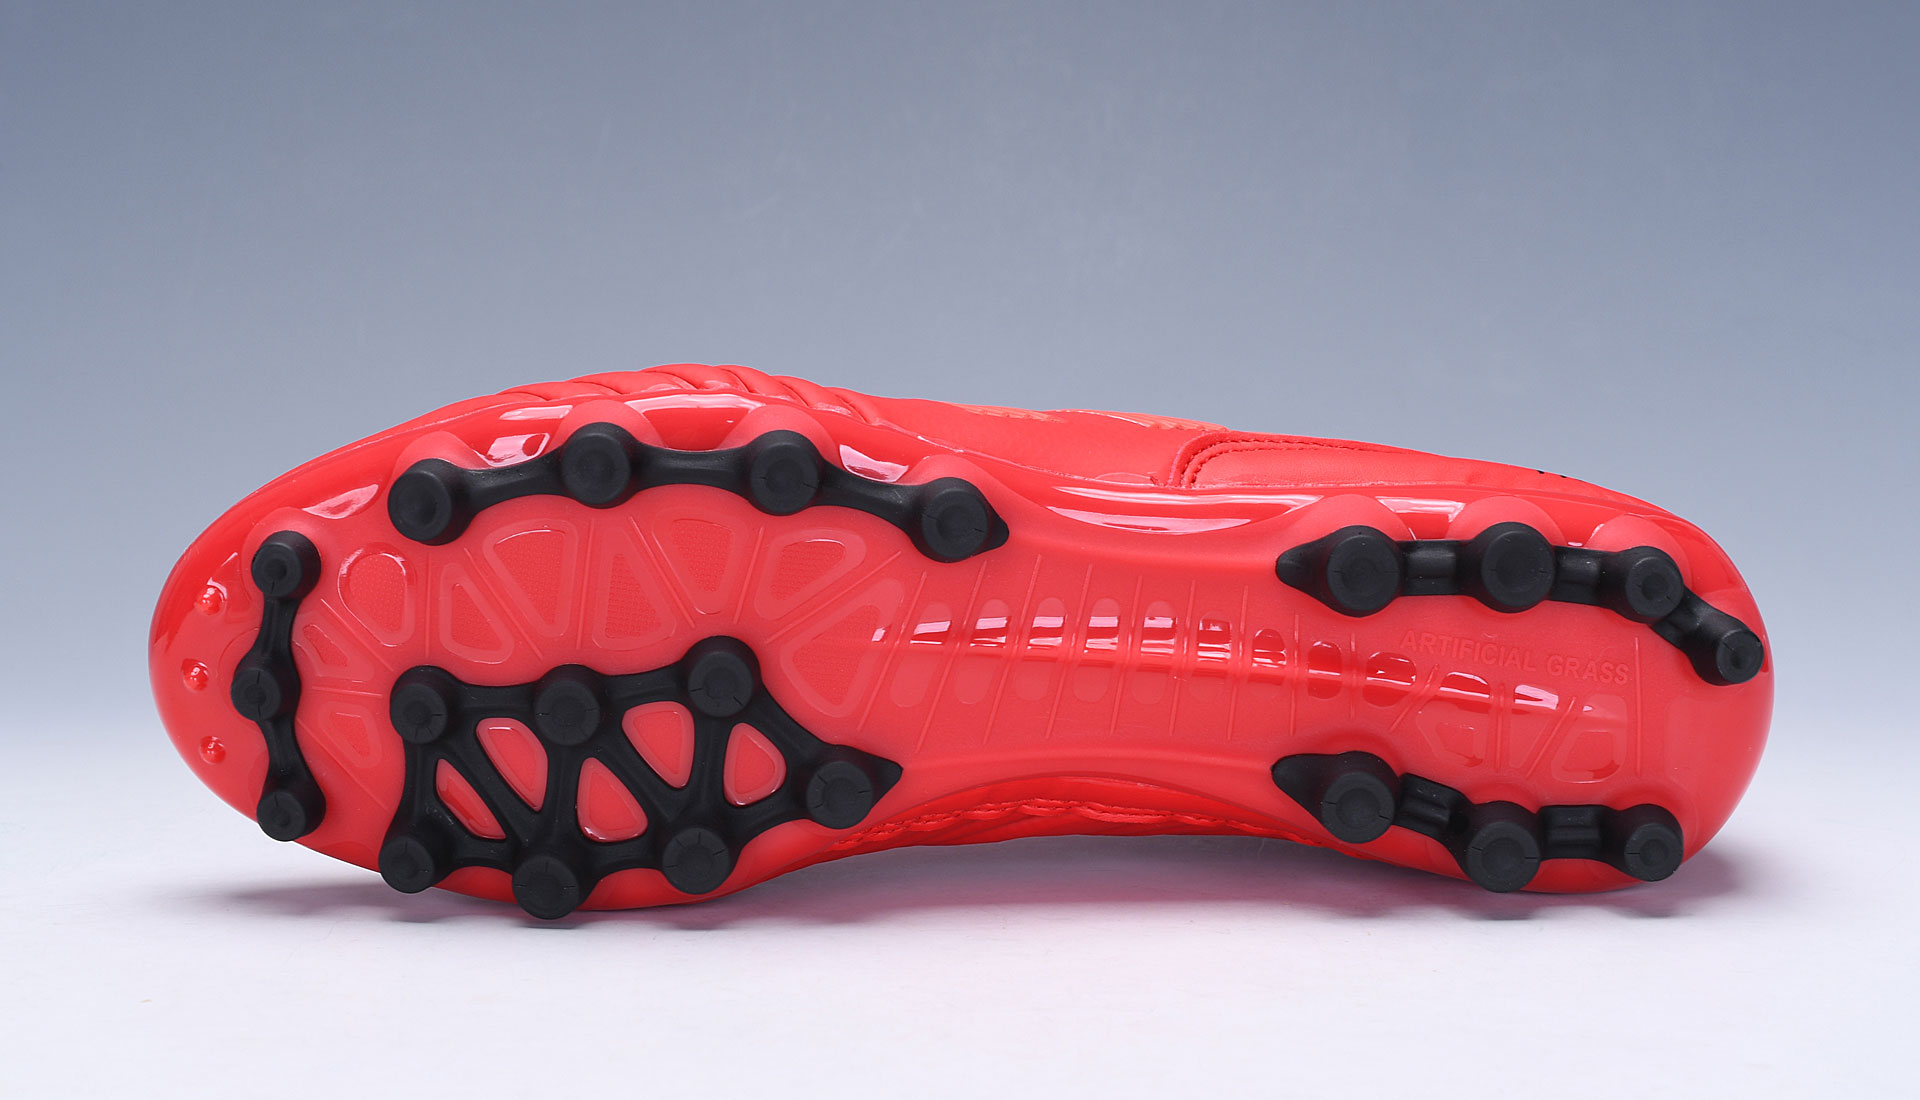 Adidas Predator 193 AG Red D97944 - Ultimate Agility and Precision